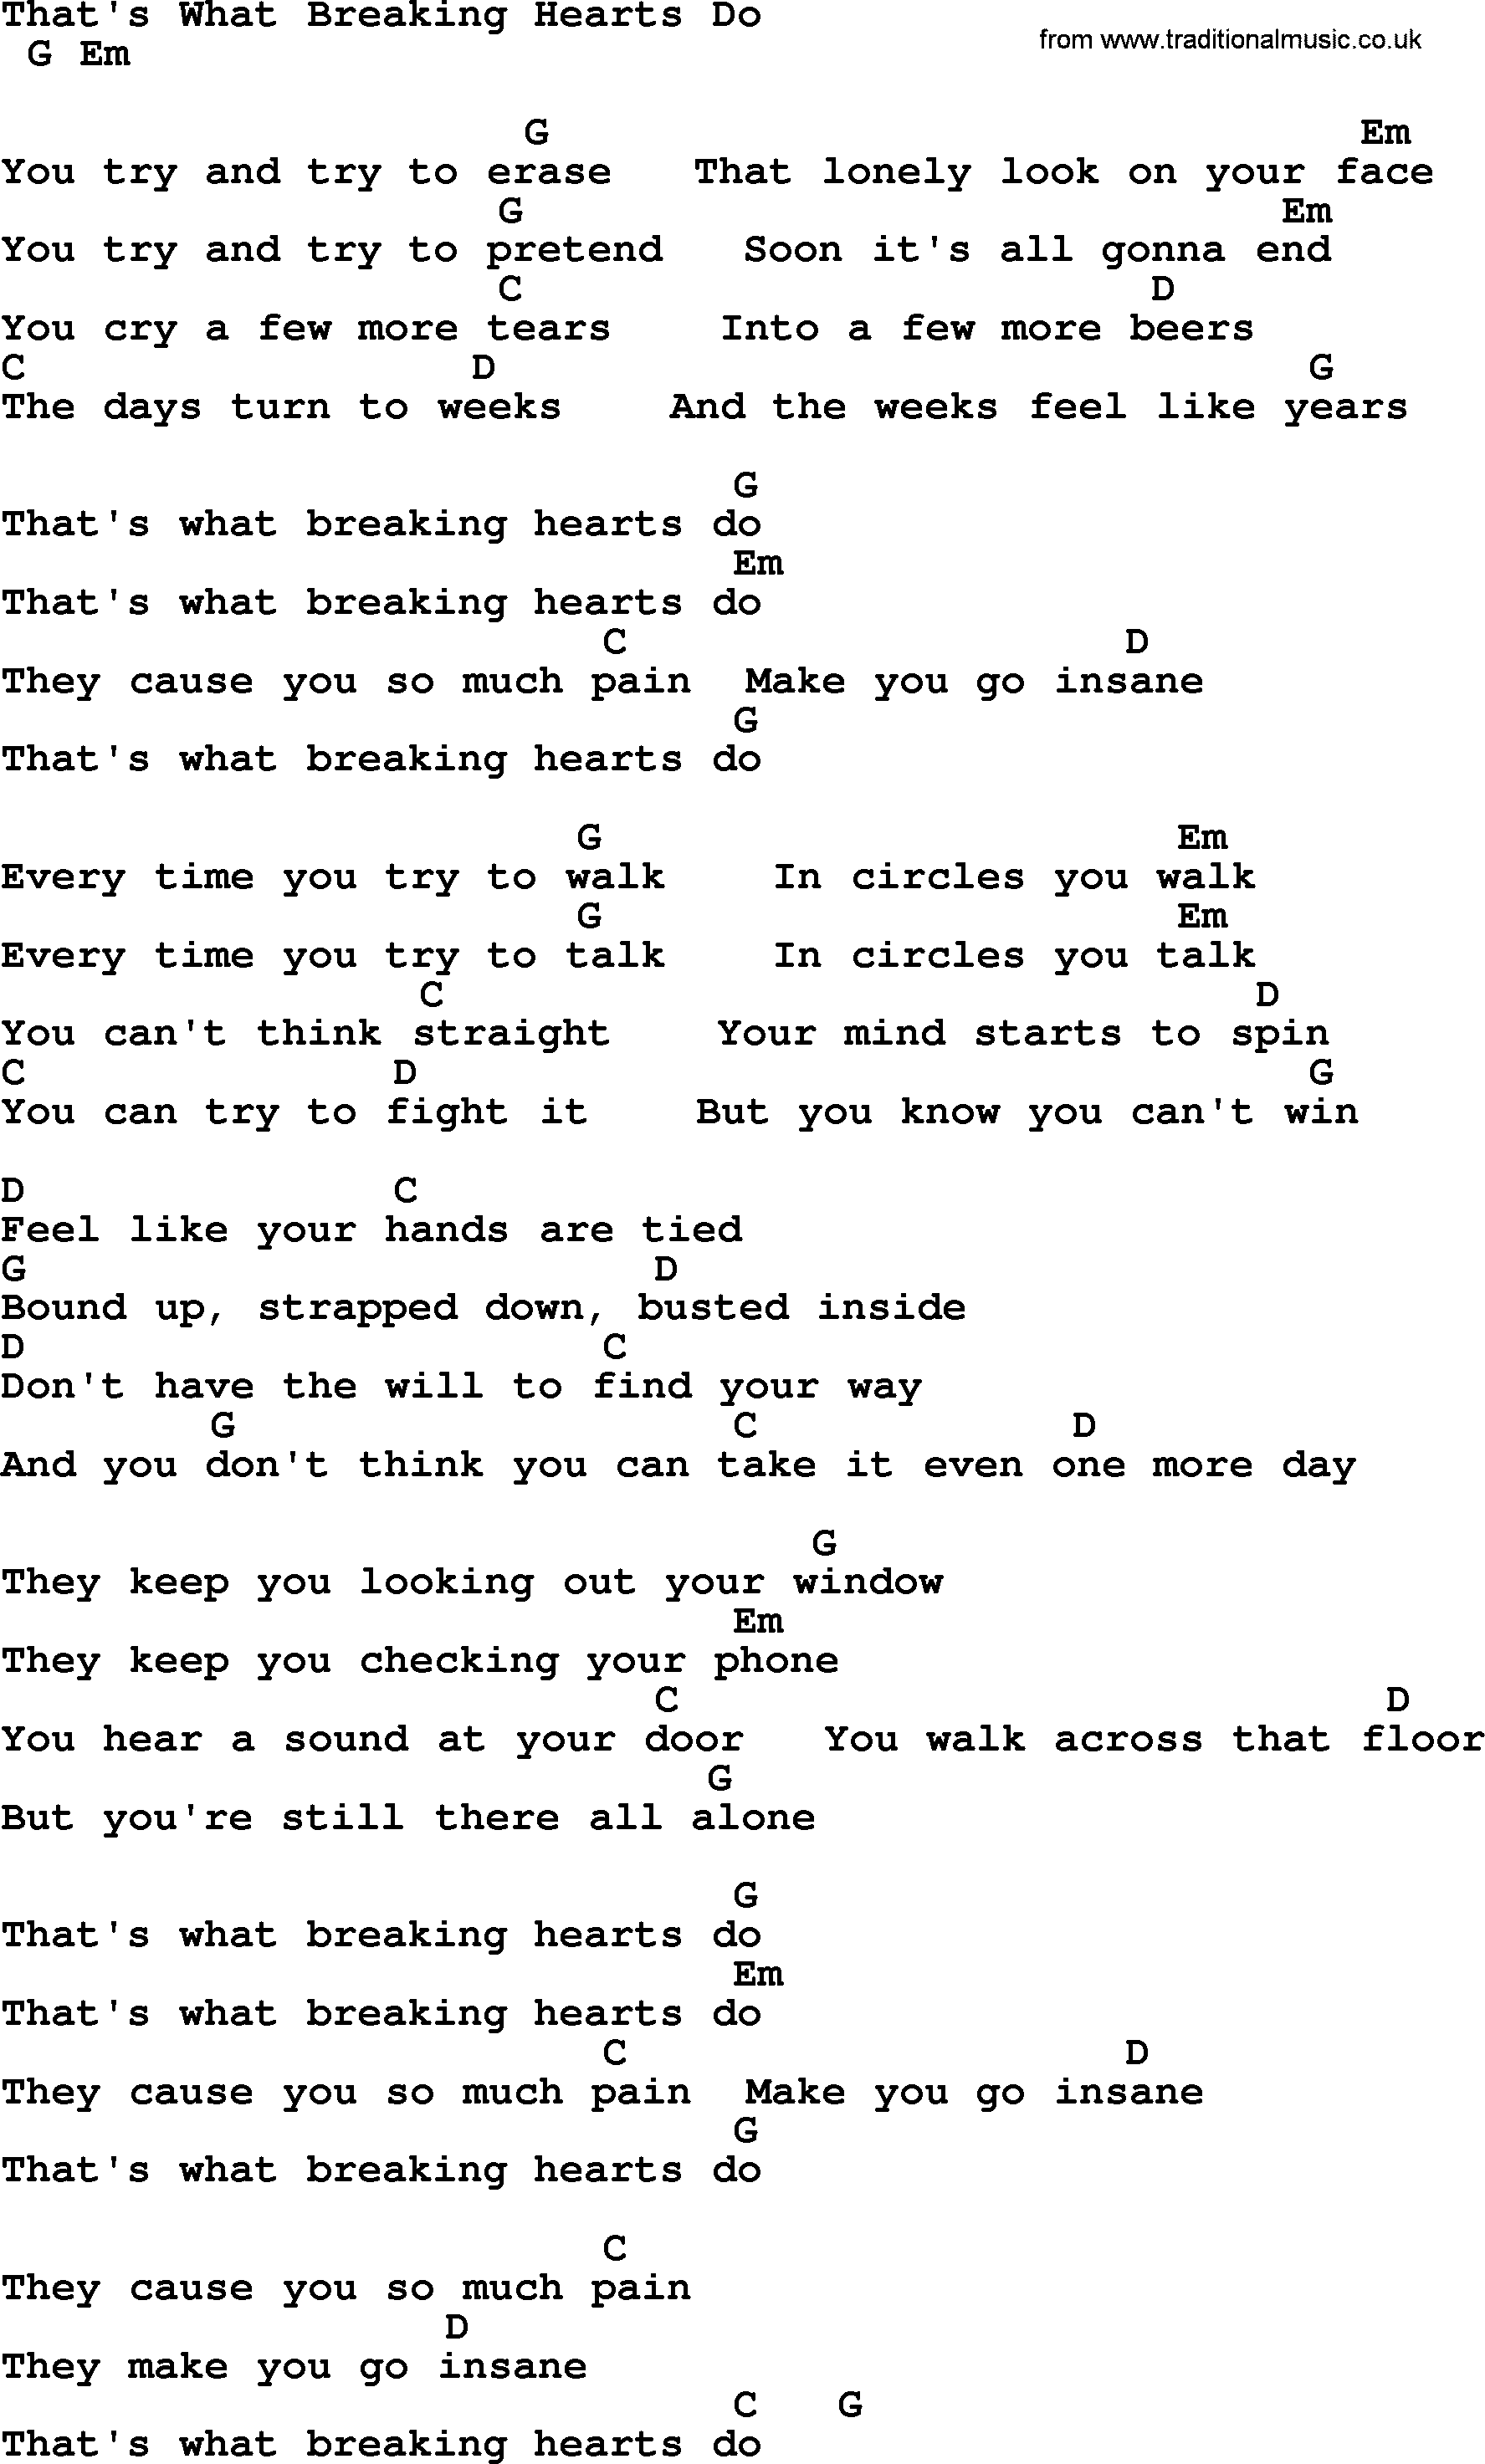 George Strait song: That's What Breaking Hearts Do, lyrics and chords